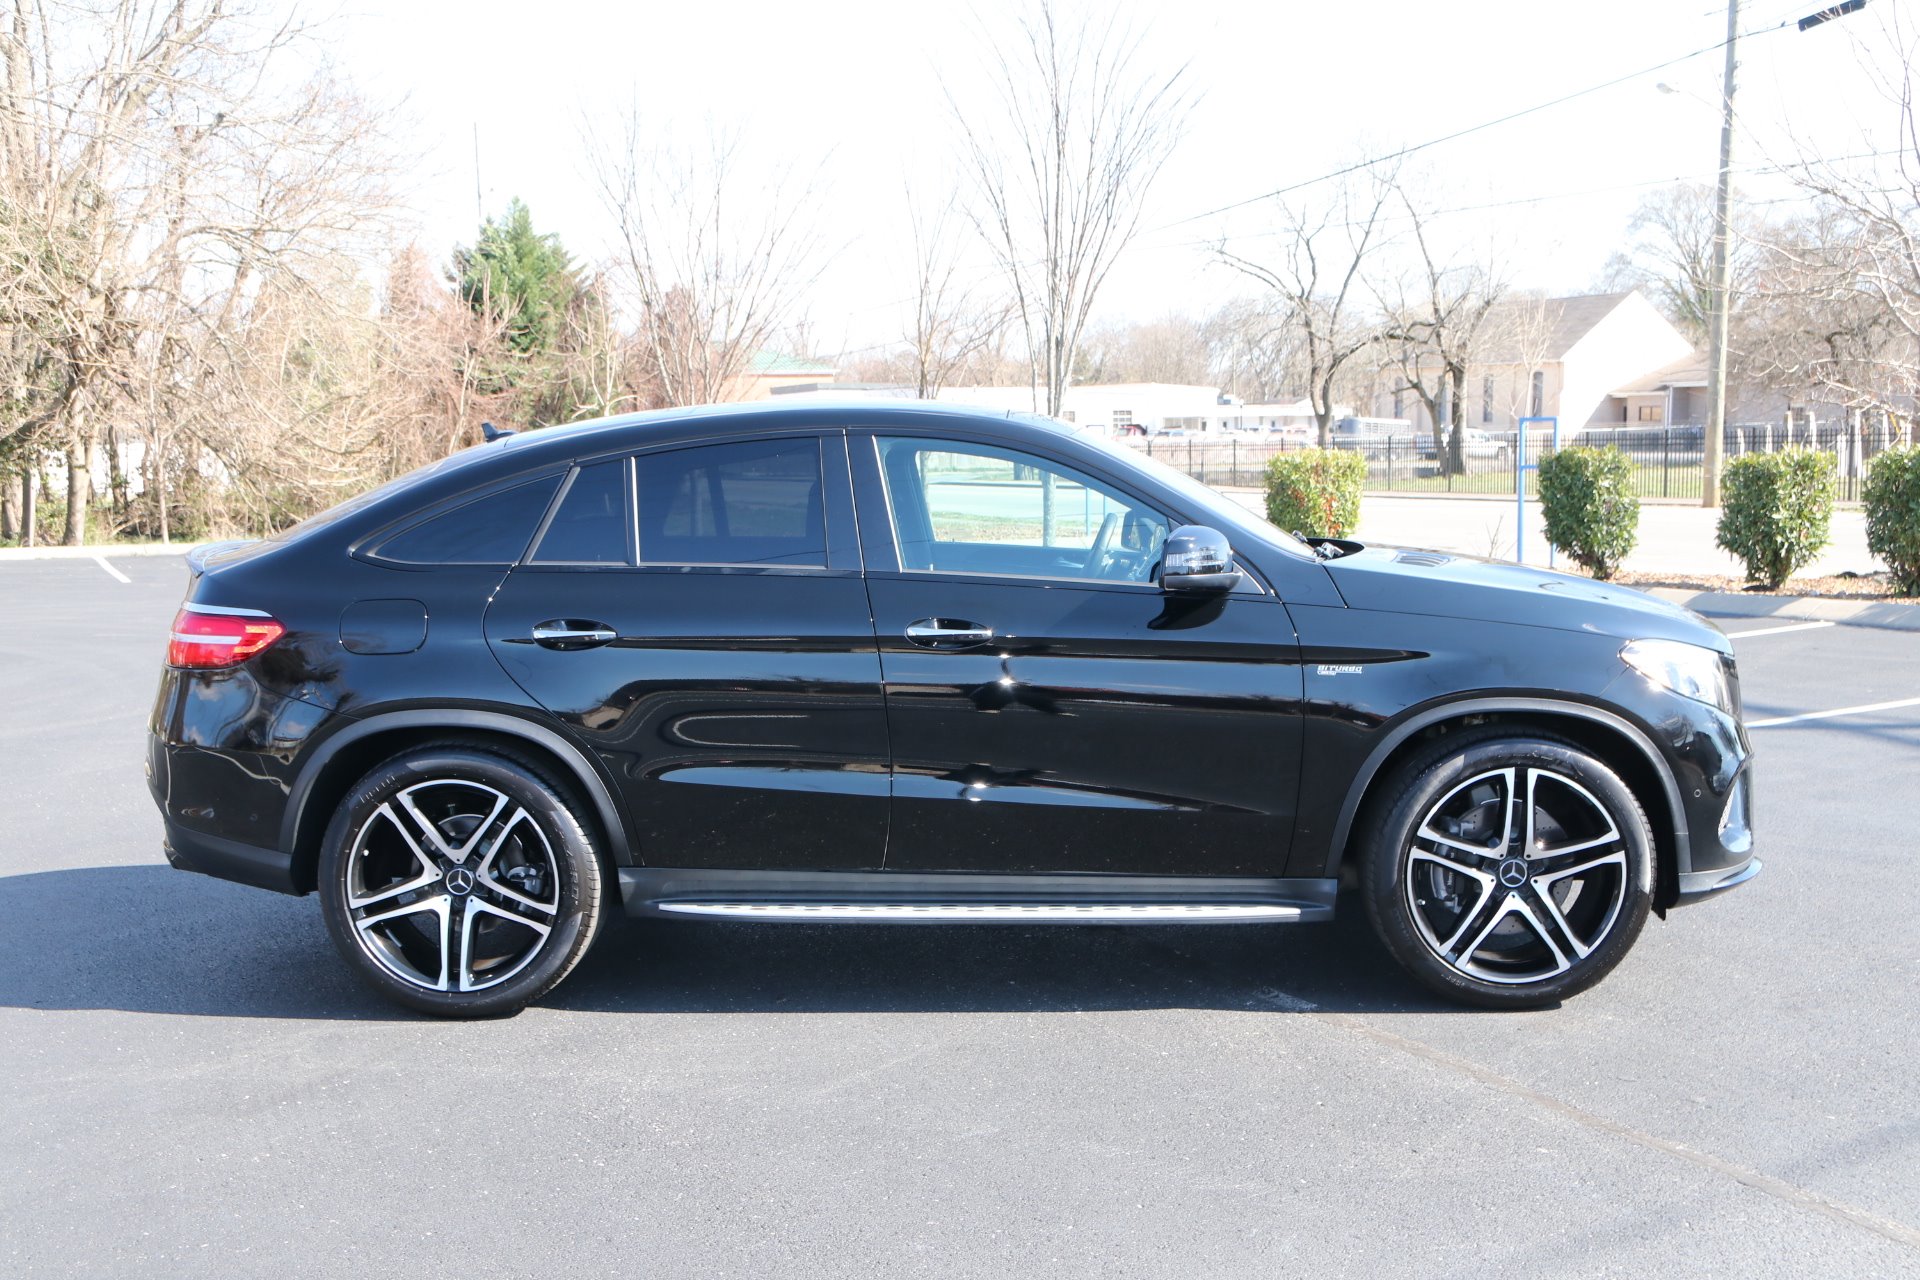 Used 19 Mercedes Benz Gle43 Amg 43 4maticcoupe W Nav Amg Gle 43 For Sale 68 950 Auto Collection Stock